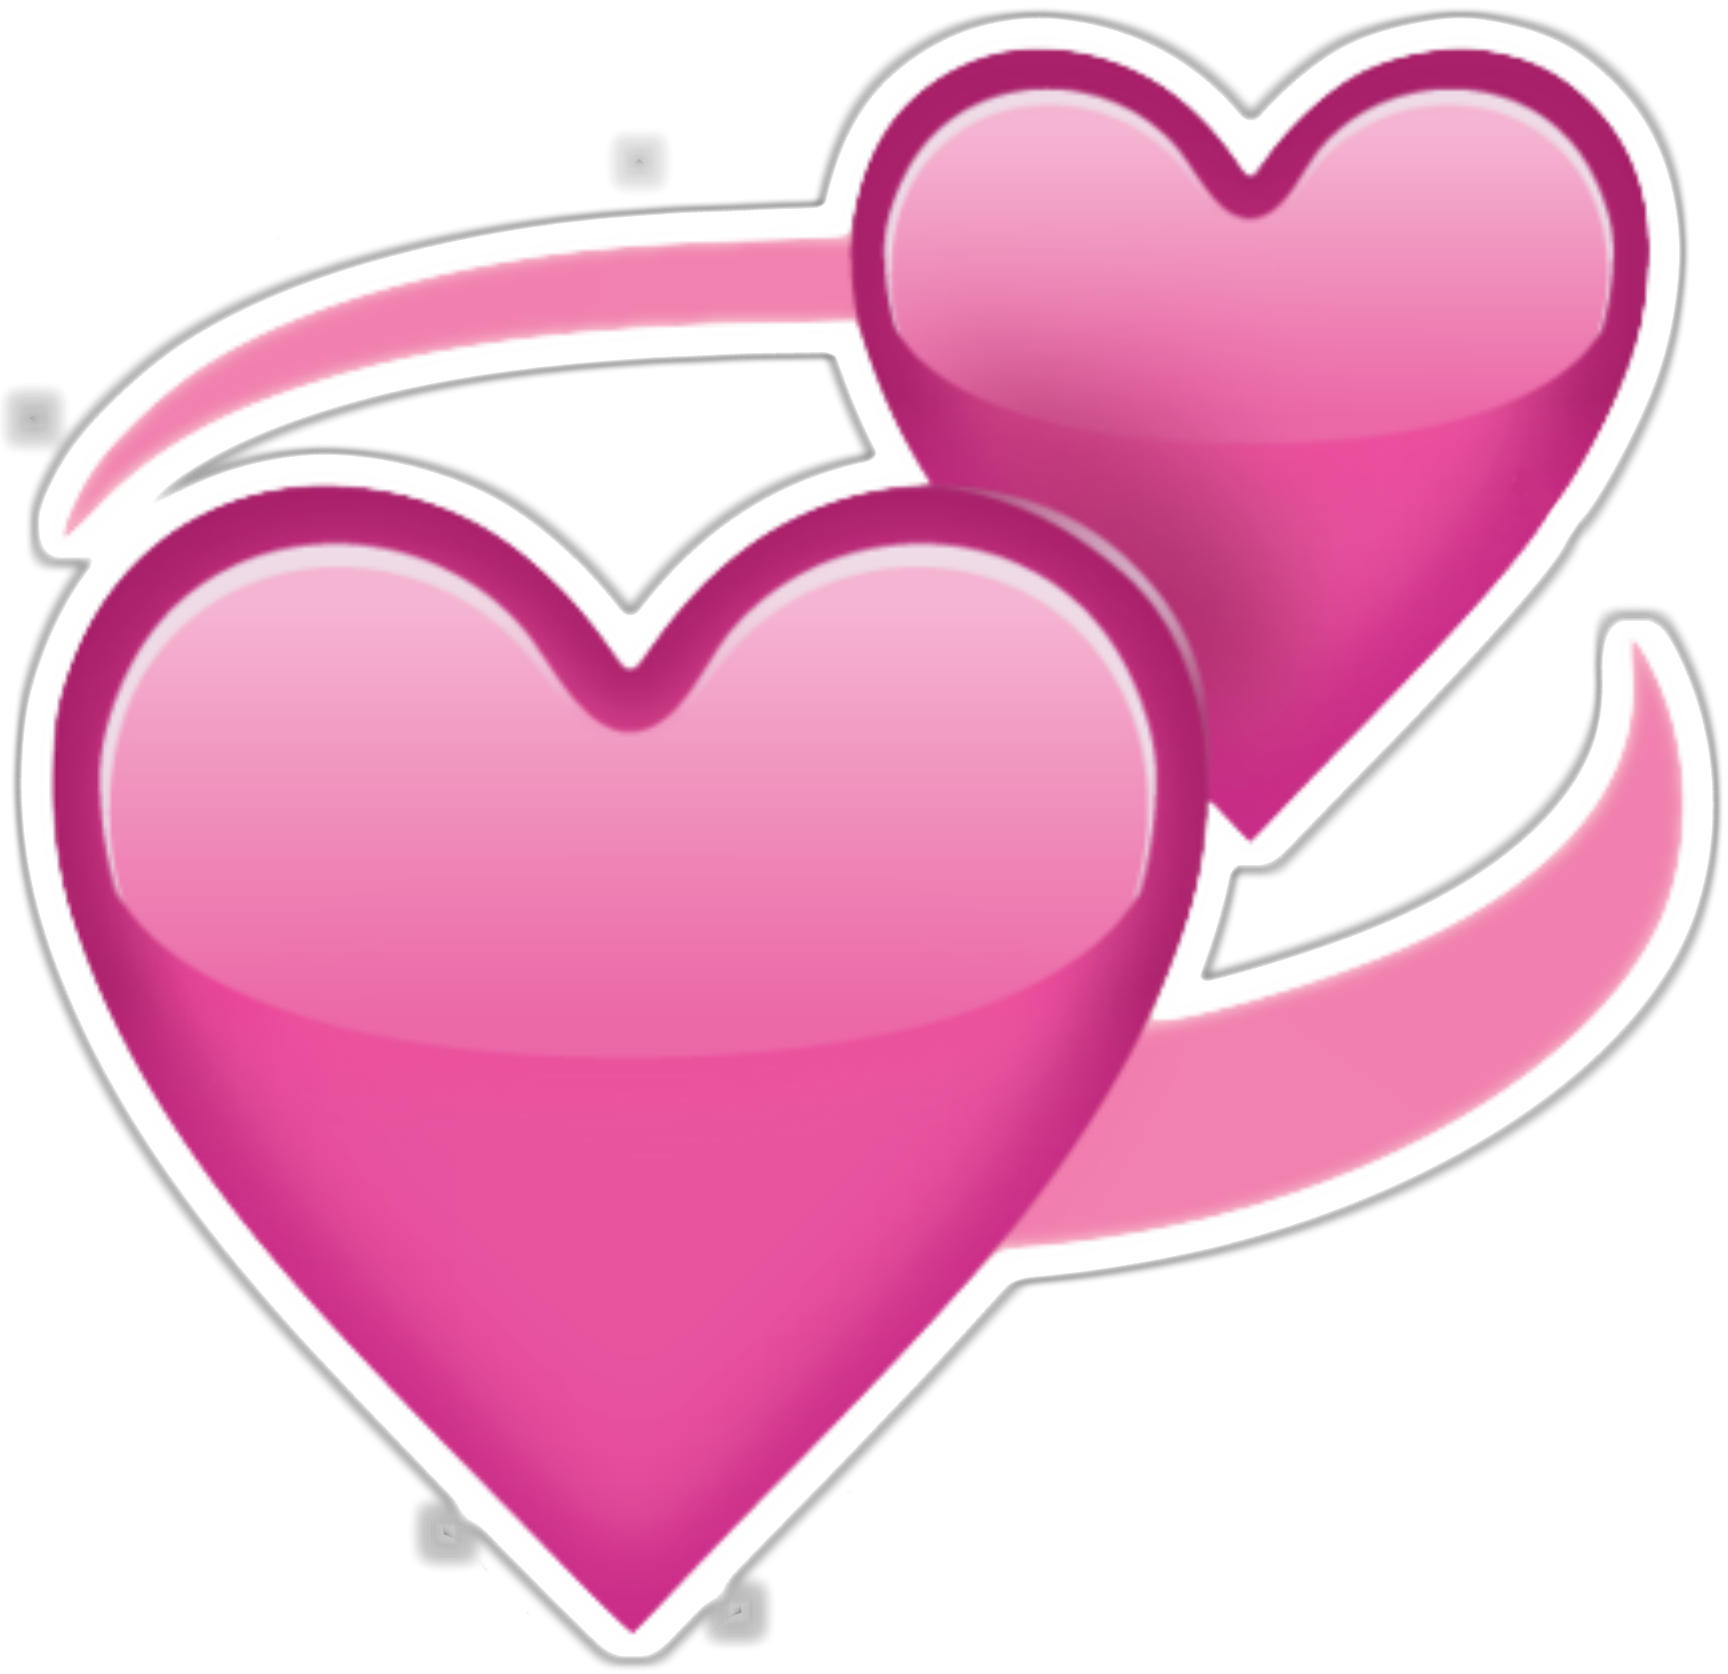 Heart clipart emoji - Pencil and in color heart clipart emoji - Colorful Heart Emoji